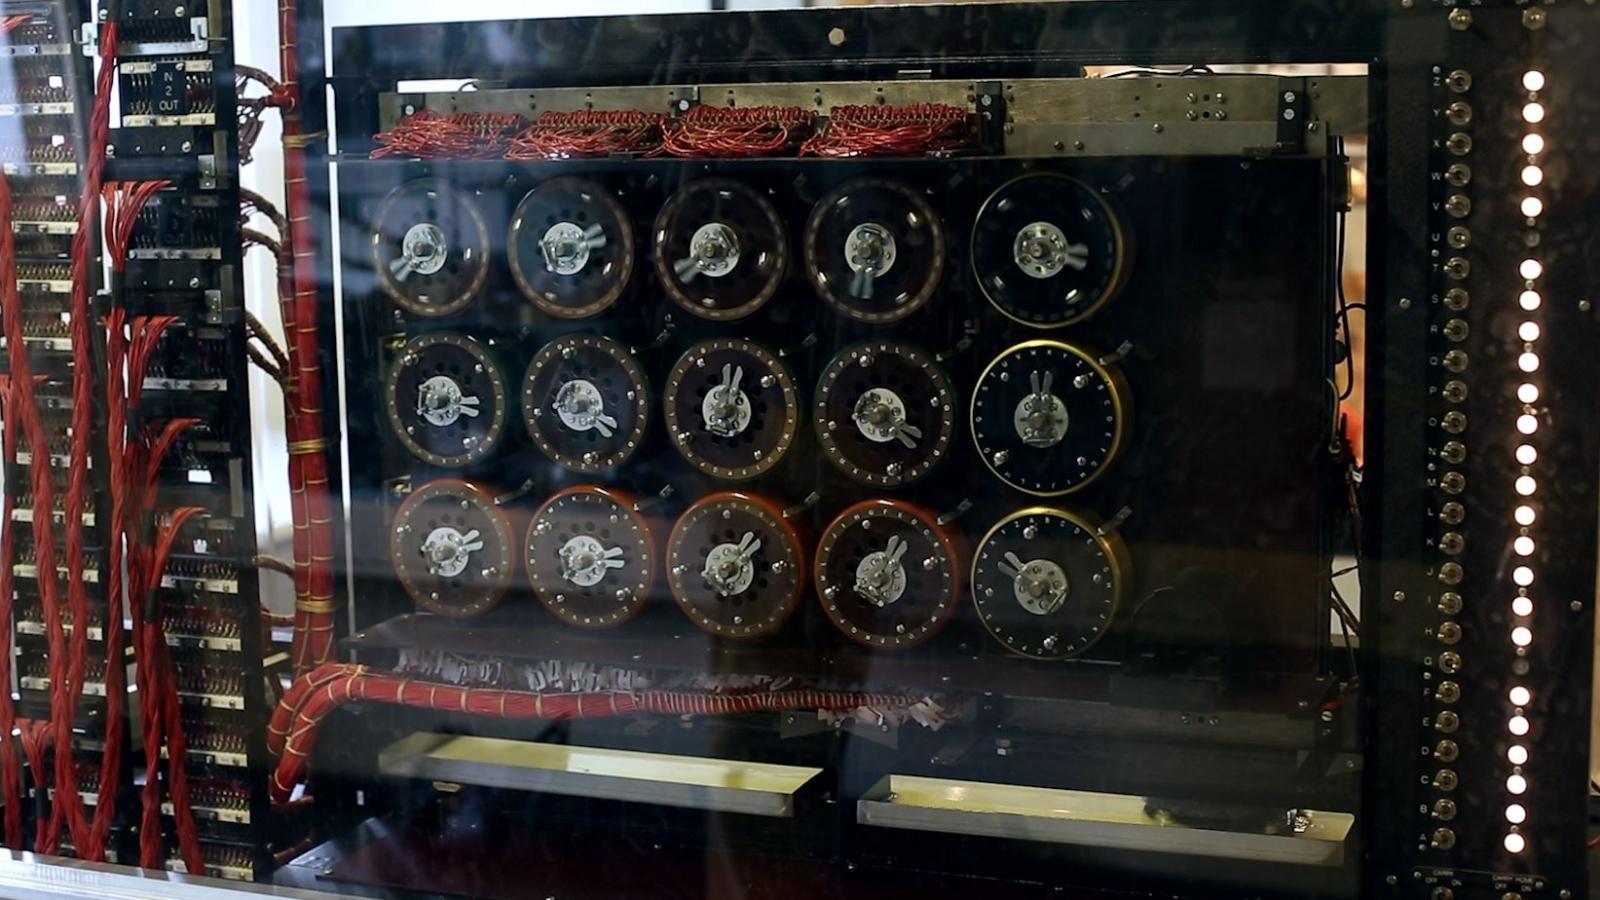 Inside Bletchley Park: Where Alan Turing Cracked the Enigma Machine